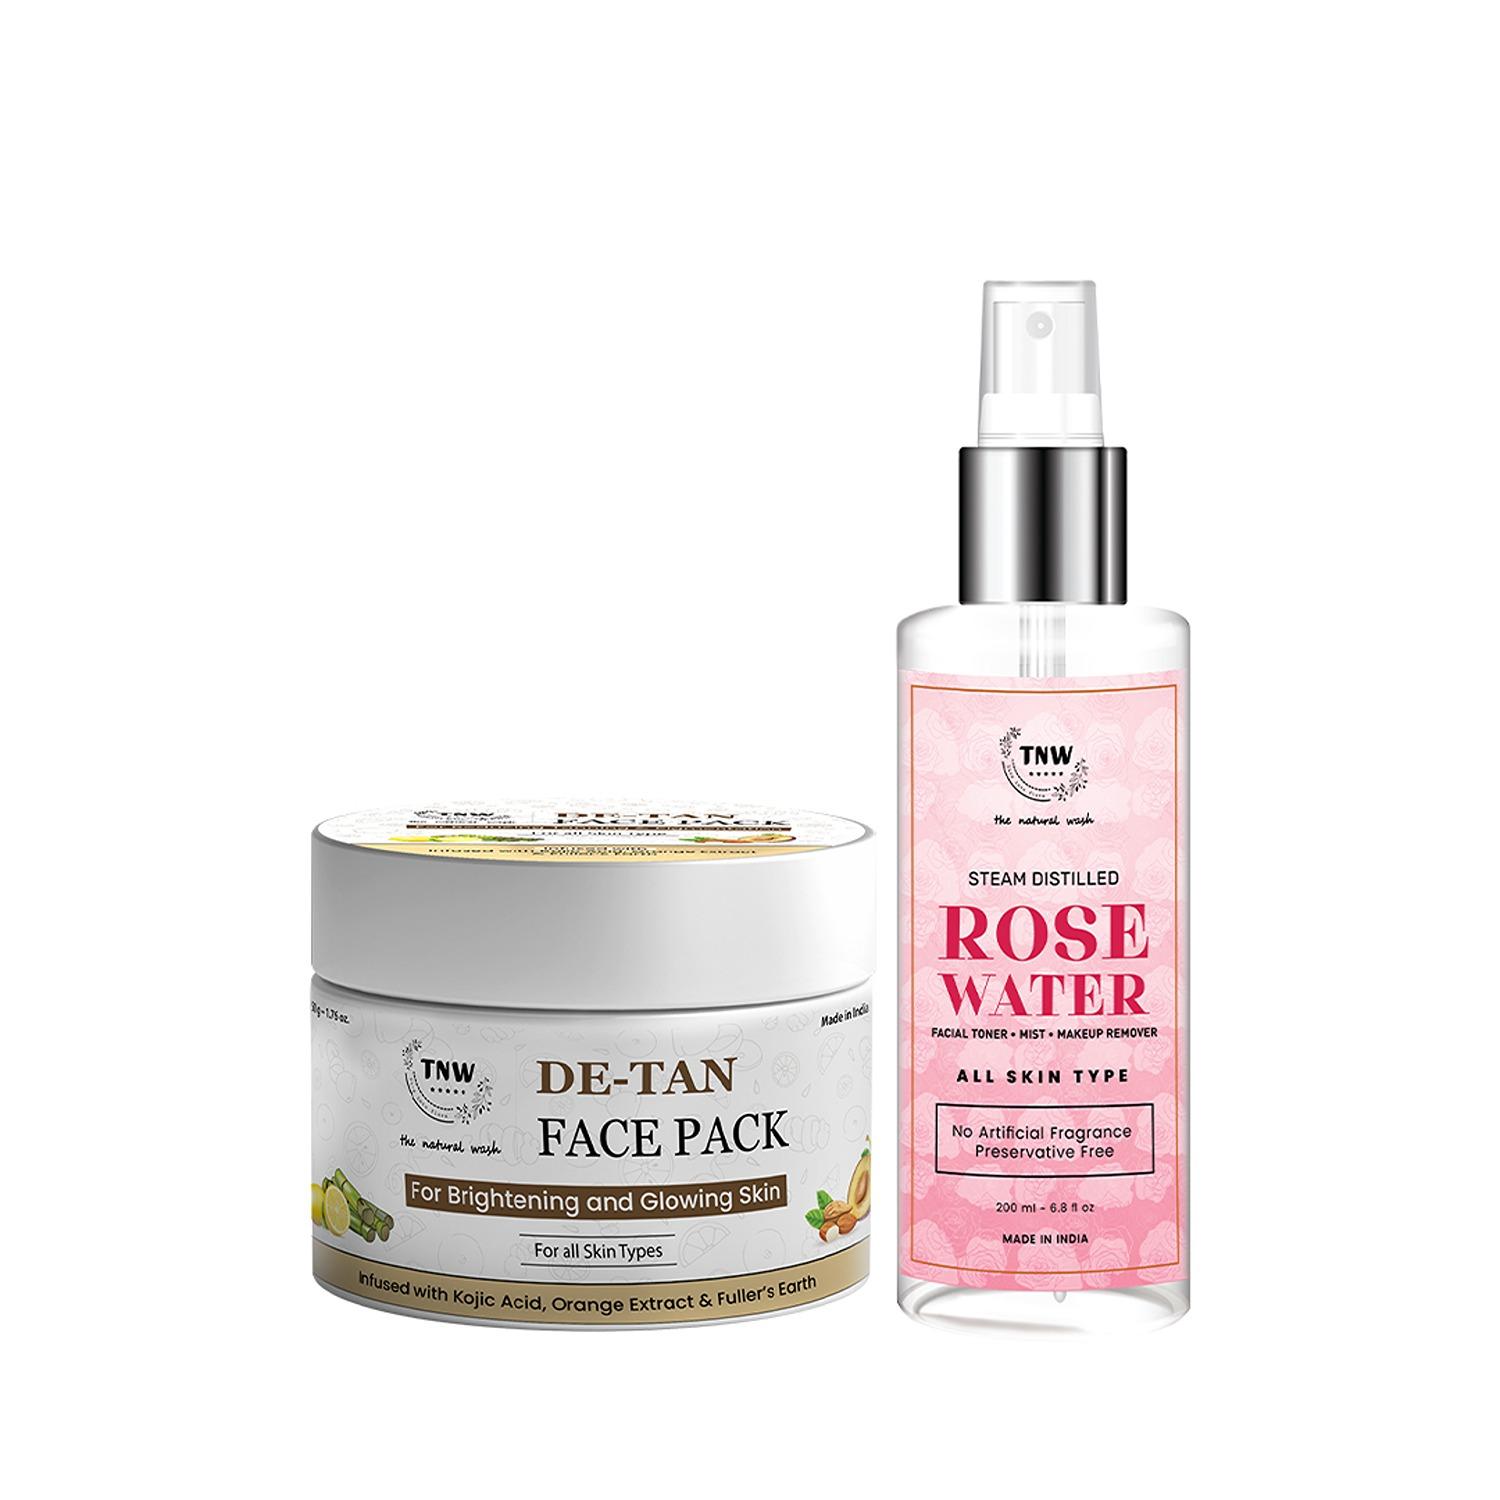 TNW The Natural Wash | TNW The Natural Wash De Tan Face Pack and Rose Water Combo